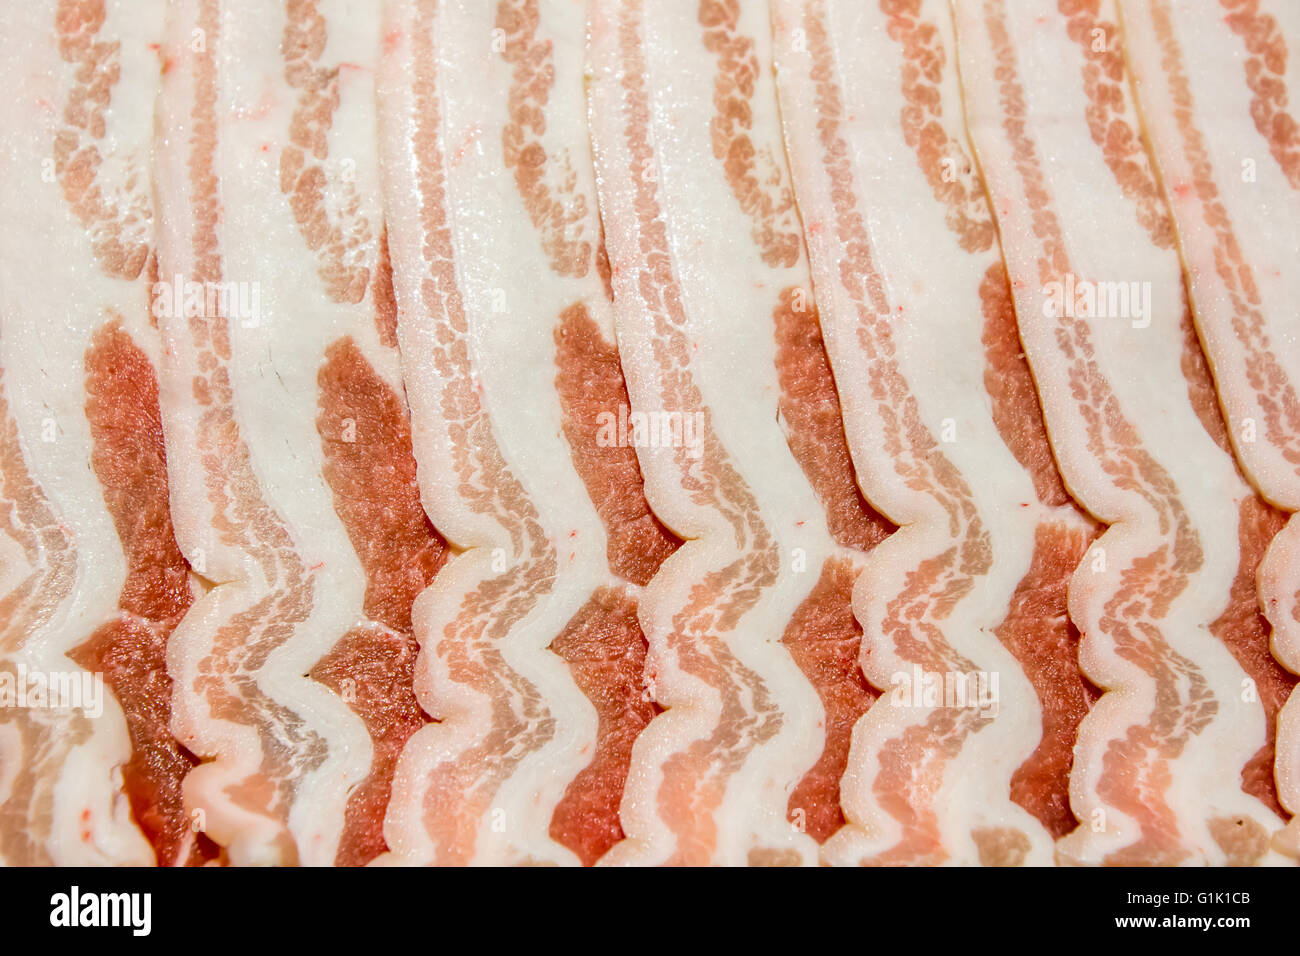 slices of pork bacon rashers laid against each other Stock Photo